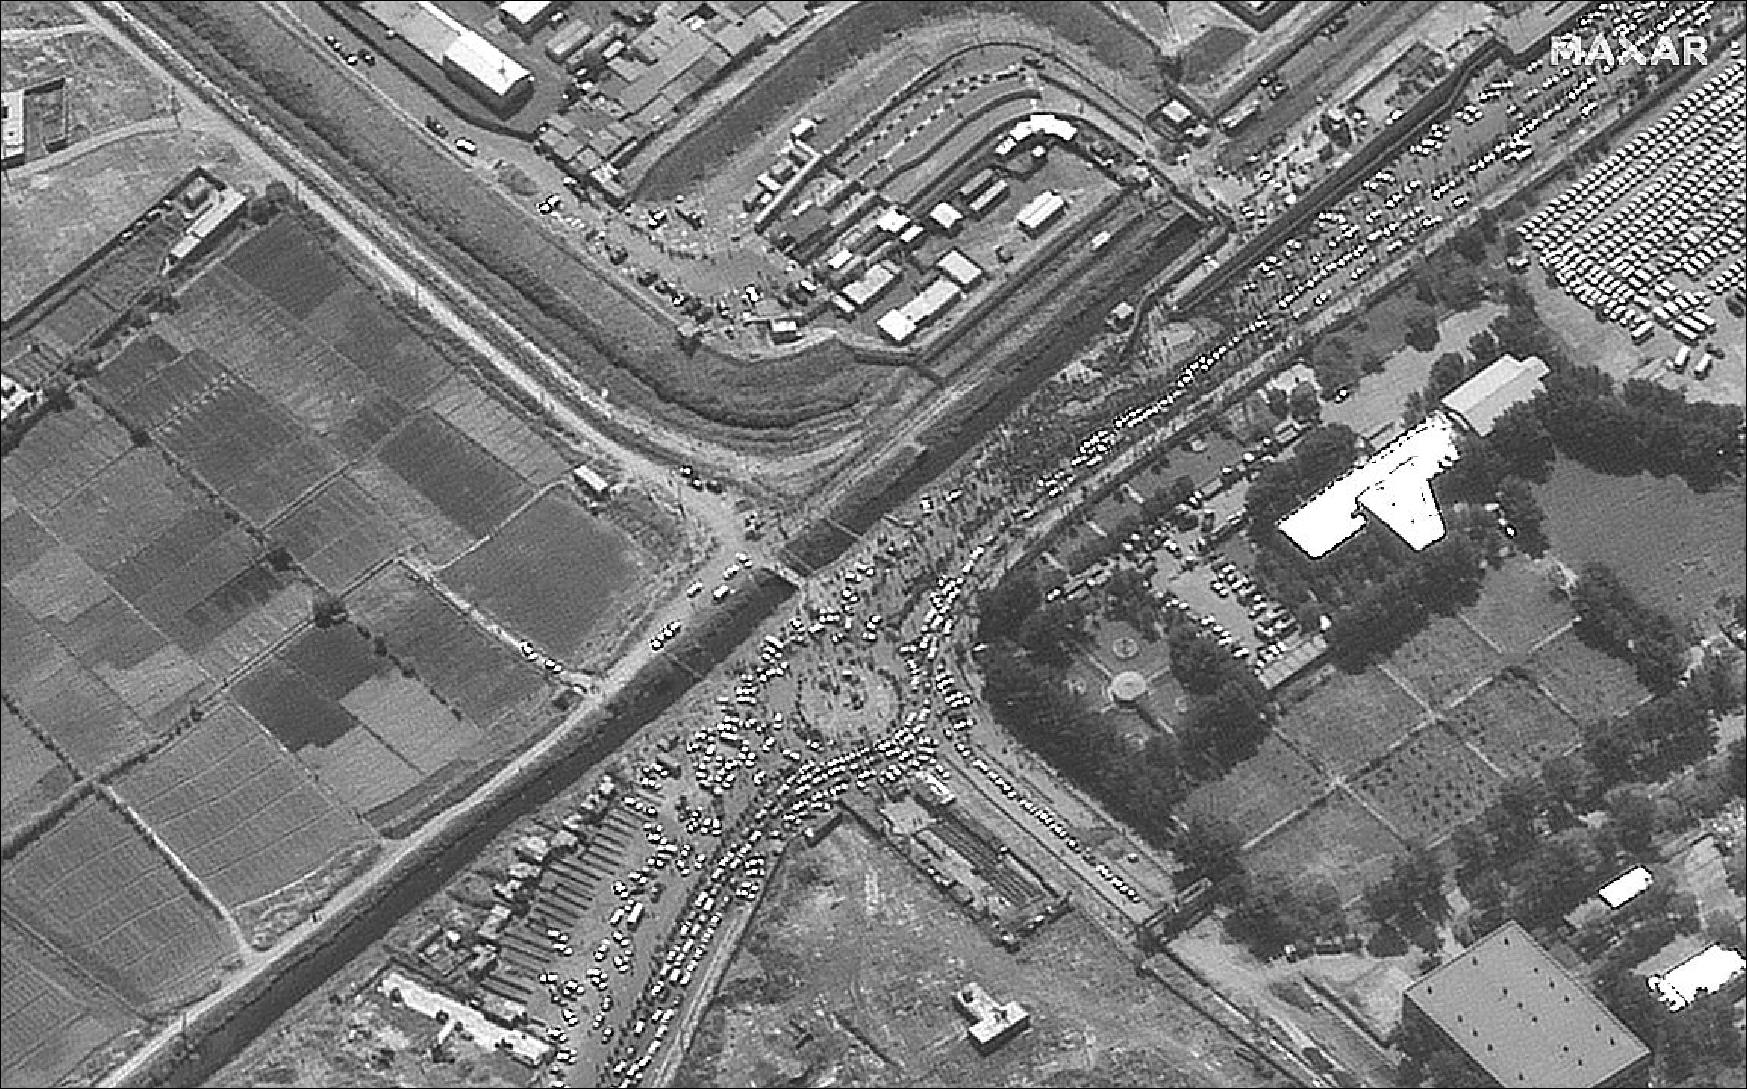 Figure 5: Image capture of the crowds at the northeastern approach to Karzai International Airport (image credit: Maxar Technologies)